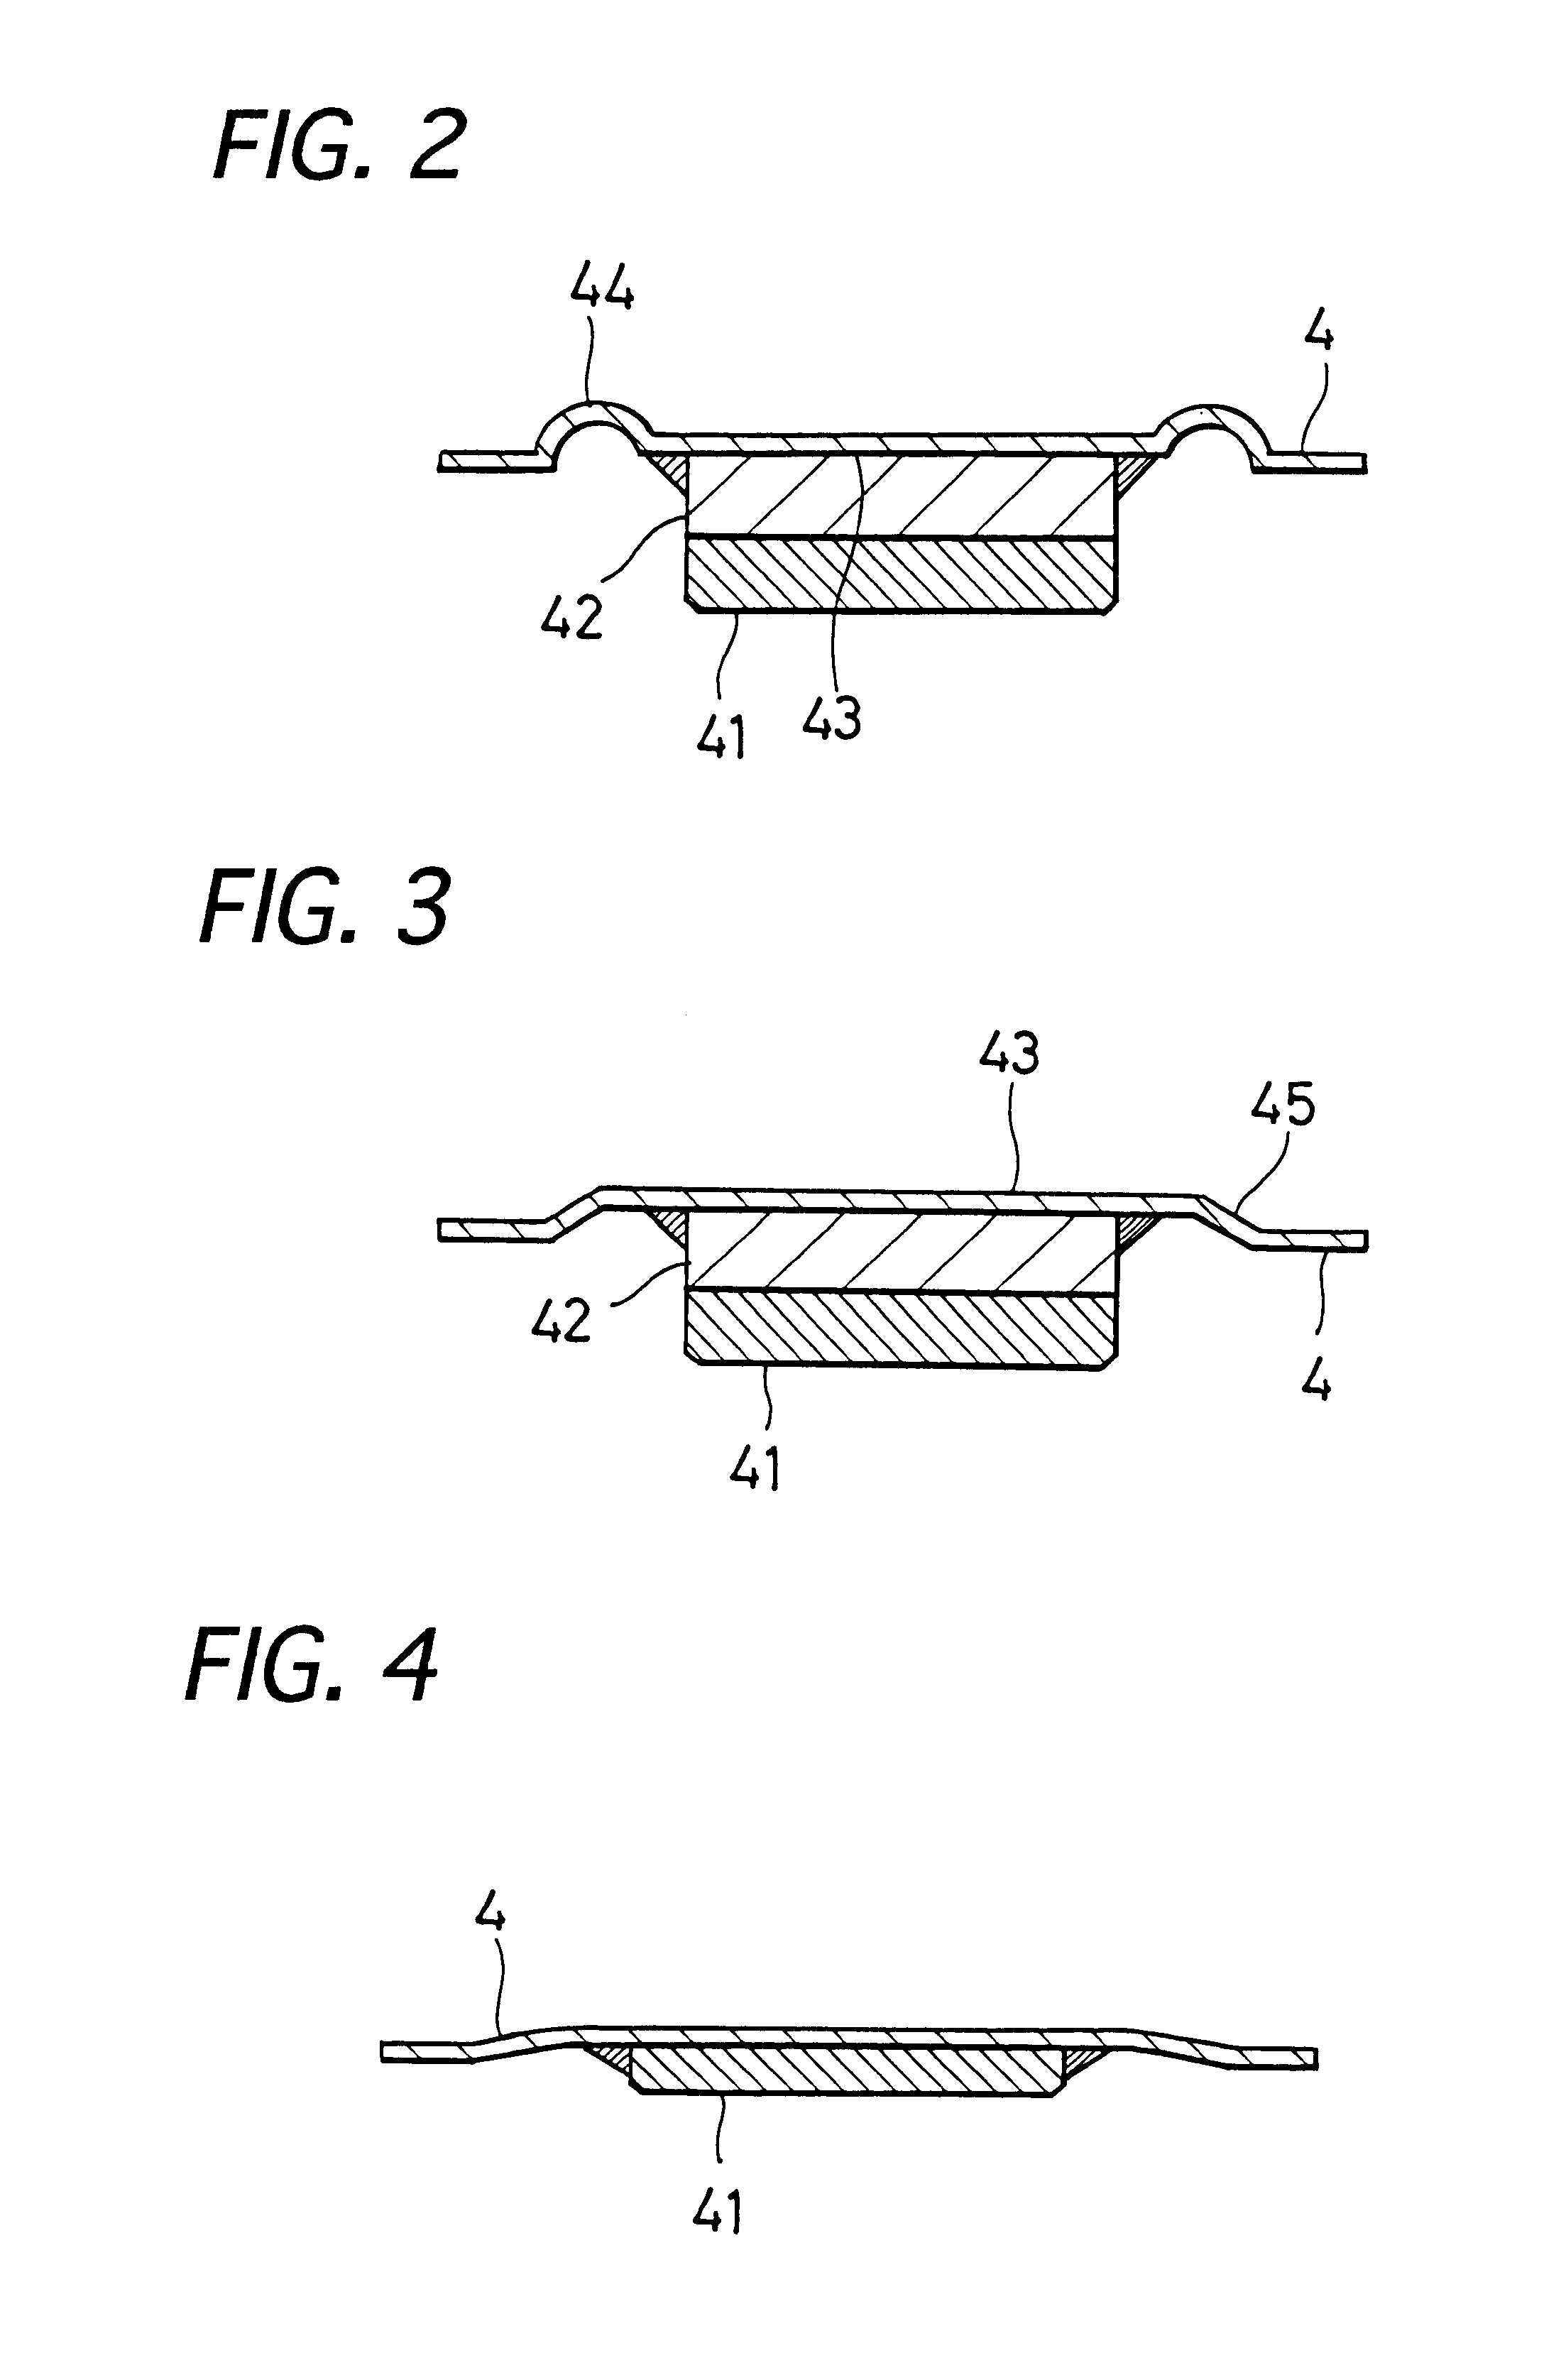 Control valve and diaphragm for use in the control valve